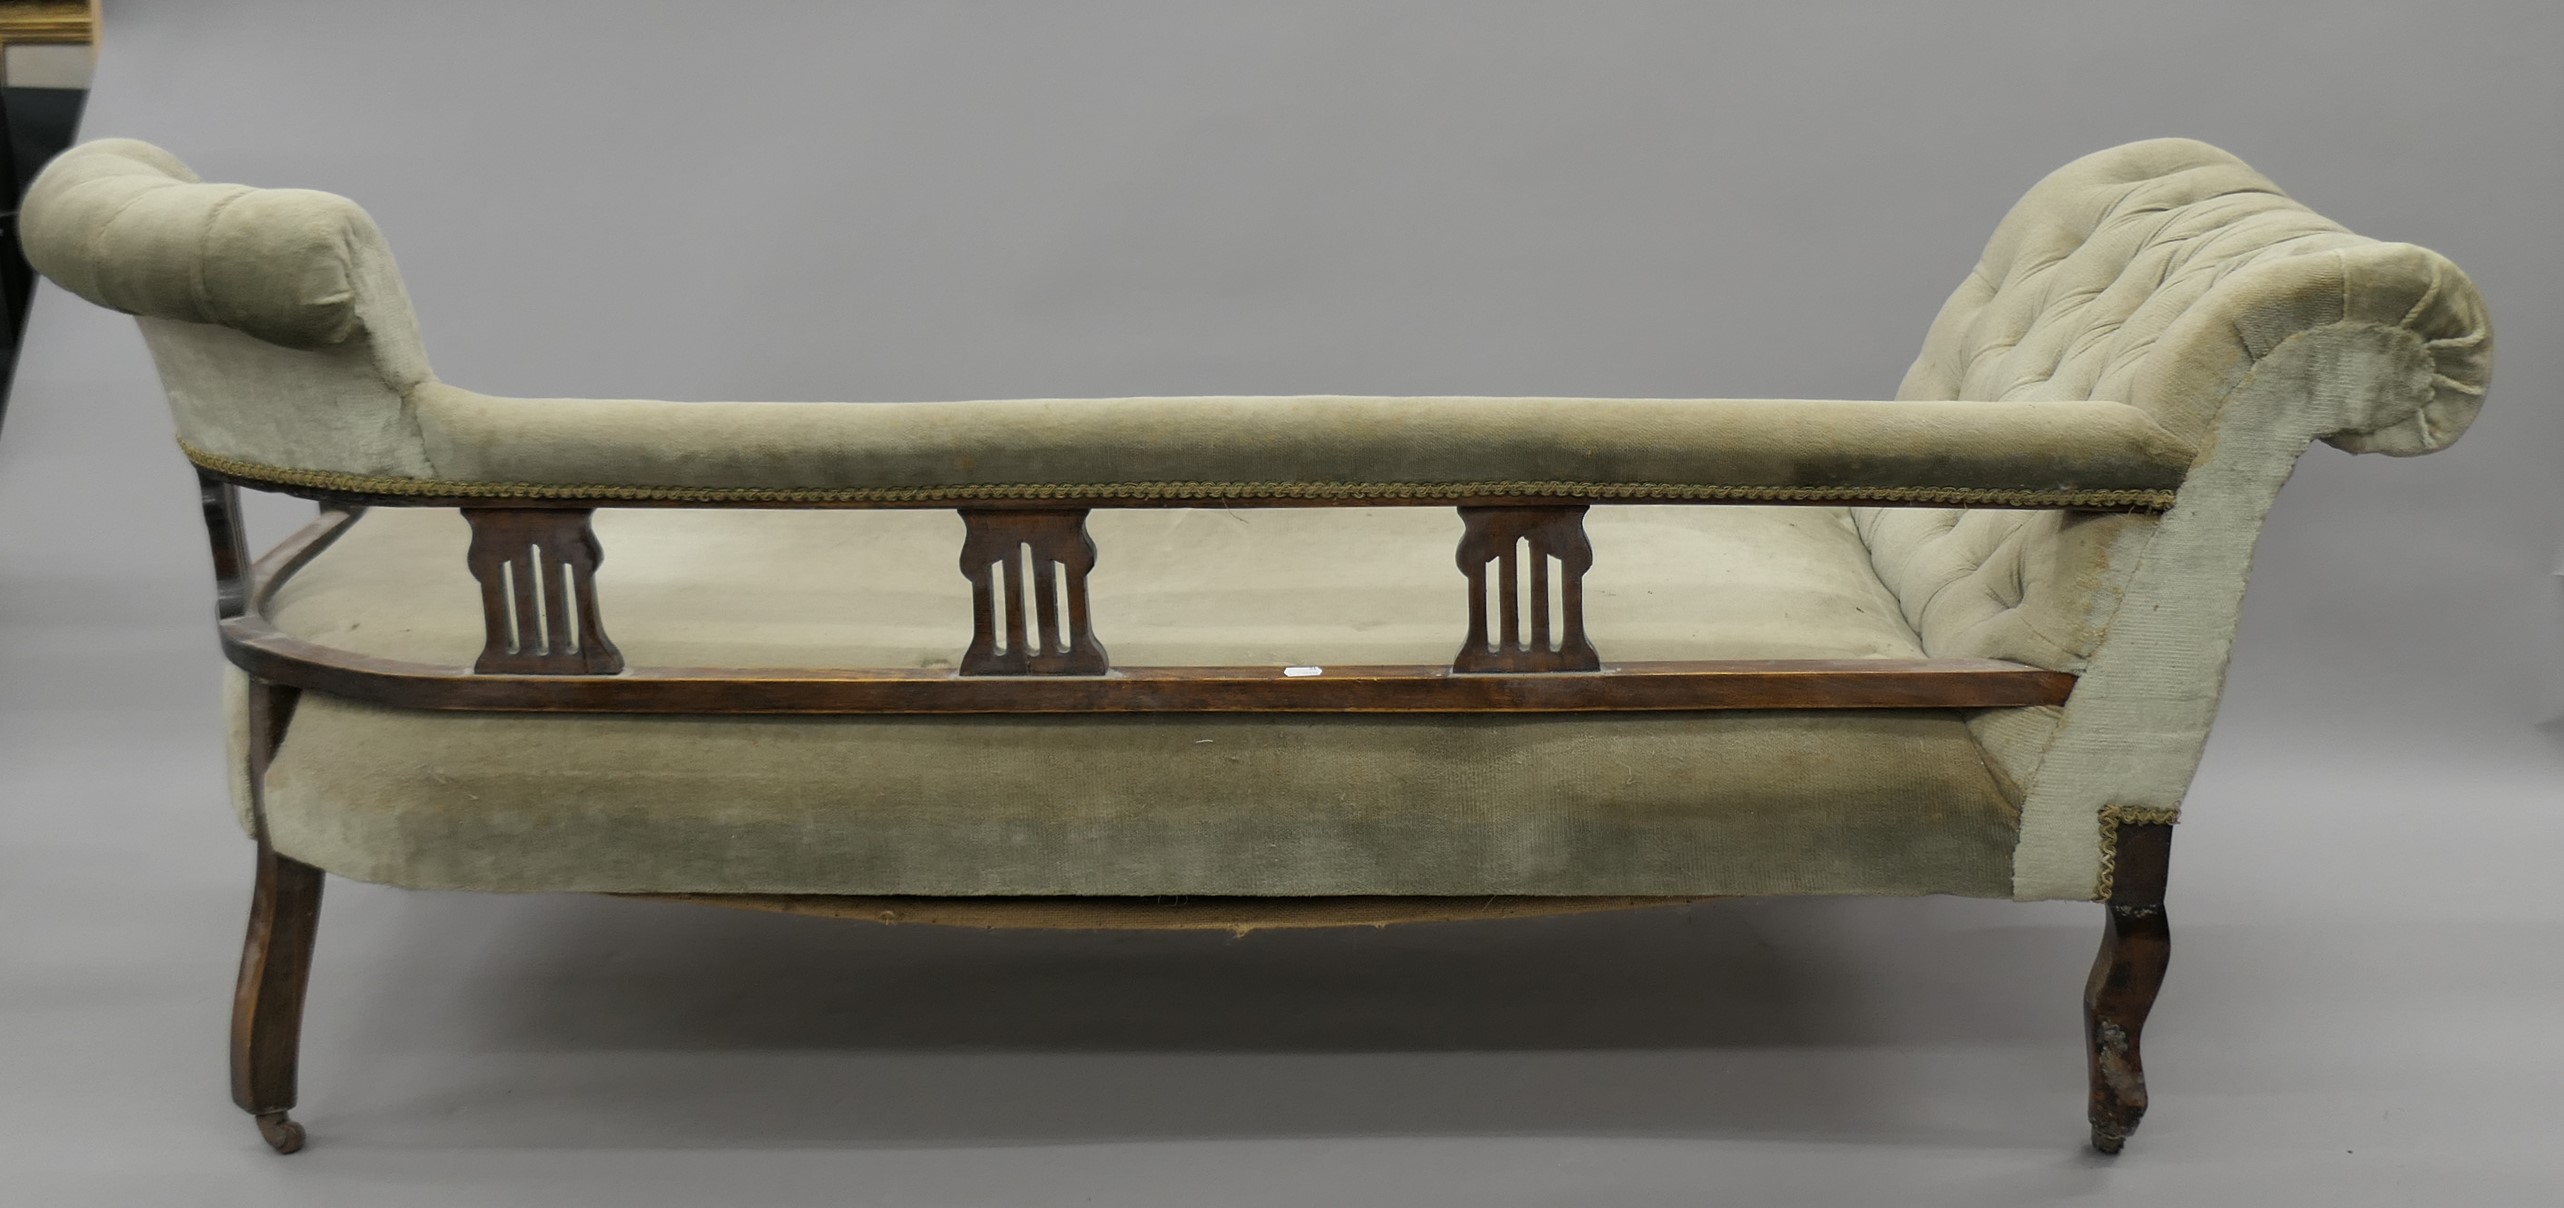 A Victorian upholstered chaise lounge. Approximately 170 cm long. - Image 4 of 4